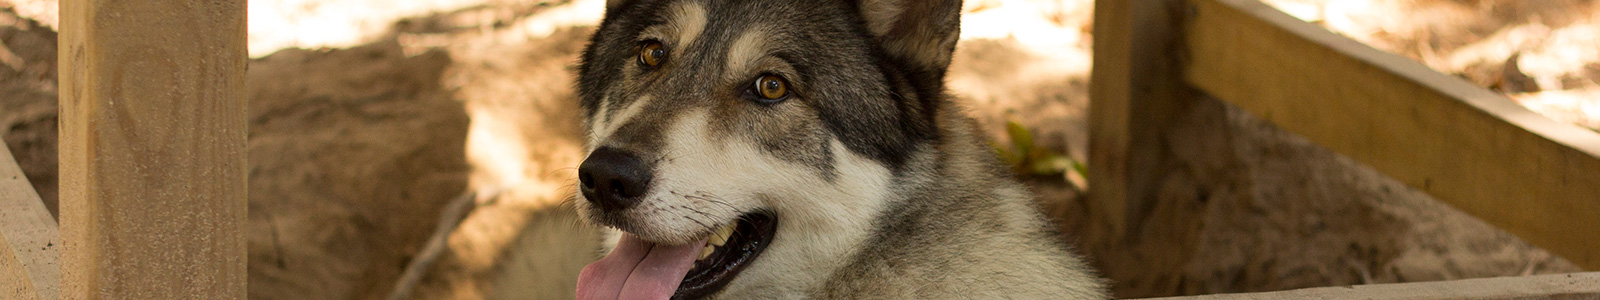 Texas Wolfdog Project Looking for Foster Homes Header Image